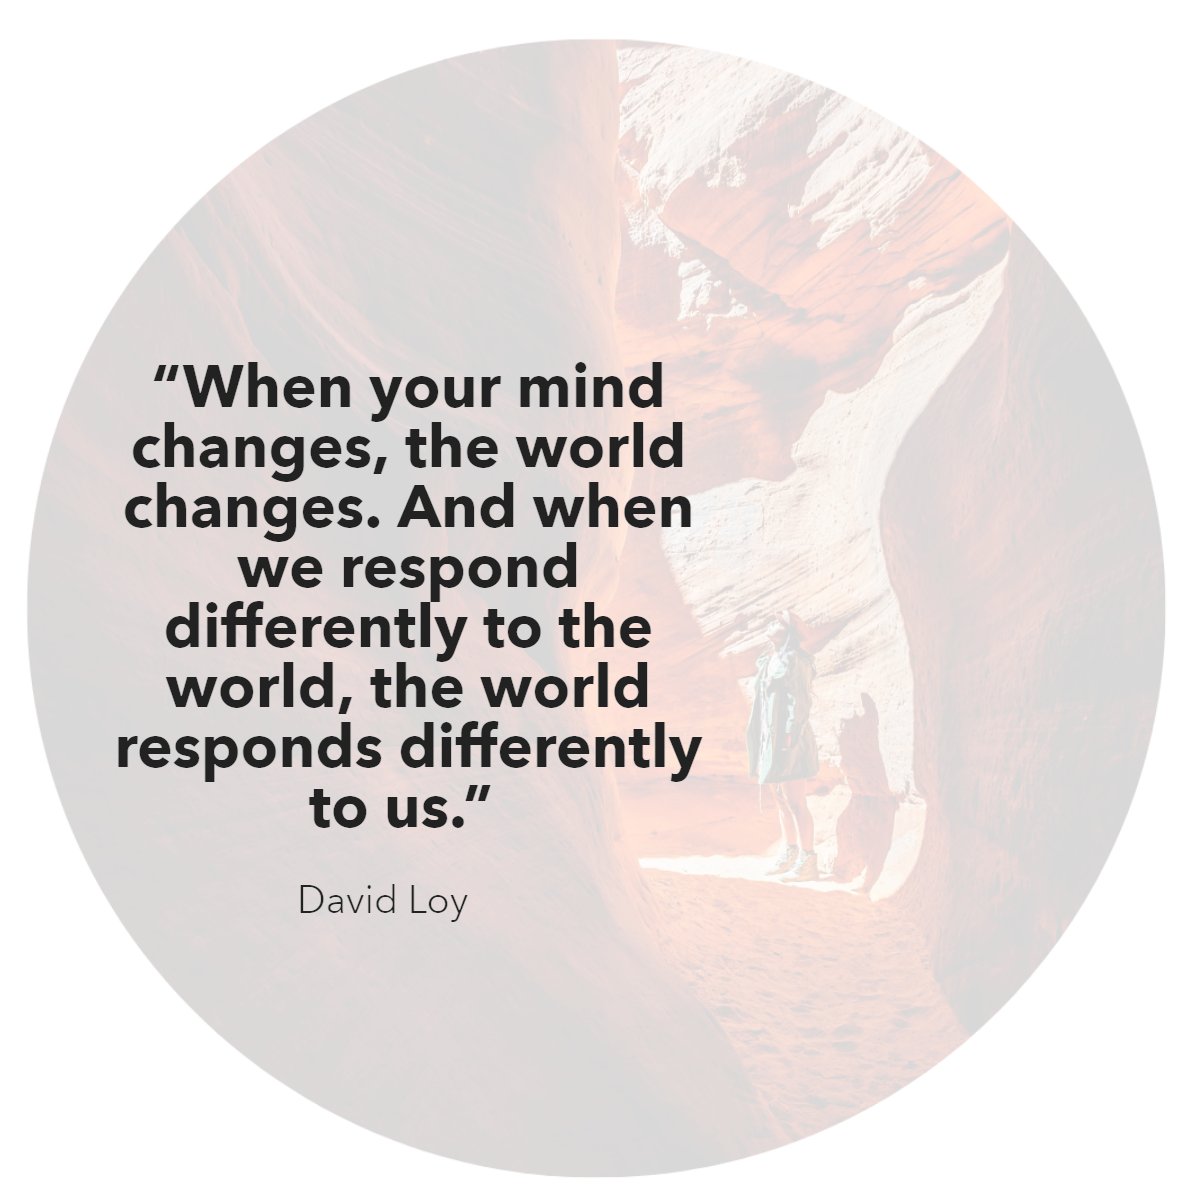 'When your mind changes, the world changes. And when we respond differently to the world, the world responds differently to us'. 
— David Loy 👌

#changes    #quotes    #inspirationalquoteoftheday    #wisdomquotes    #wisdomgoals
#cherylcitro